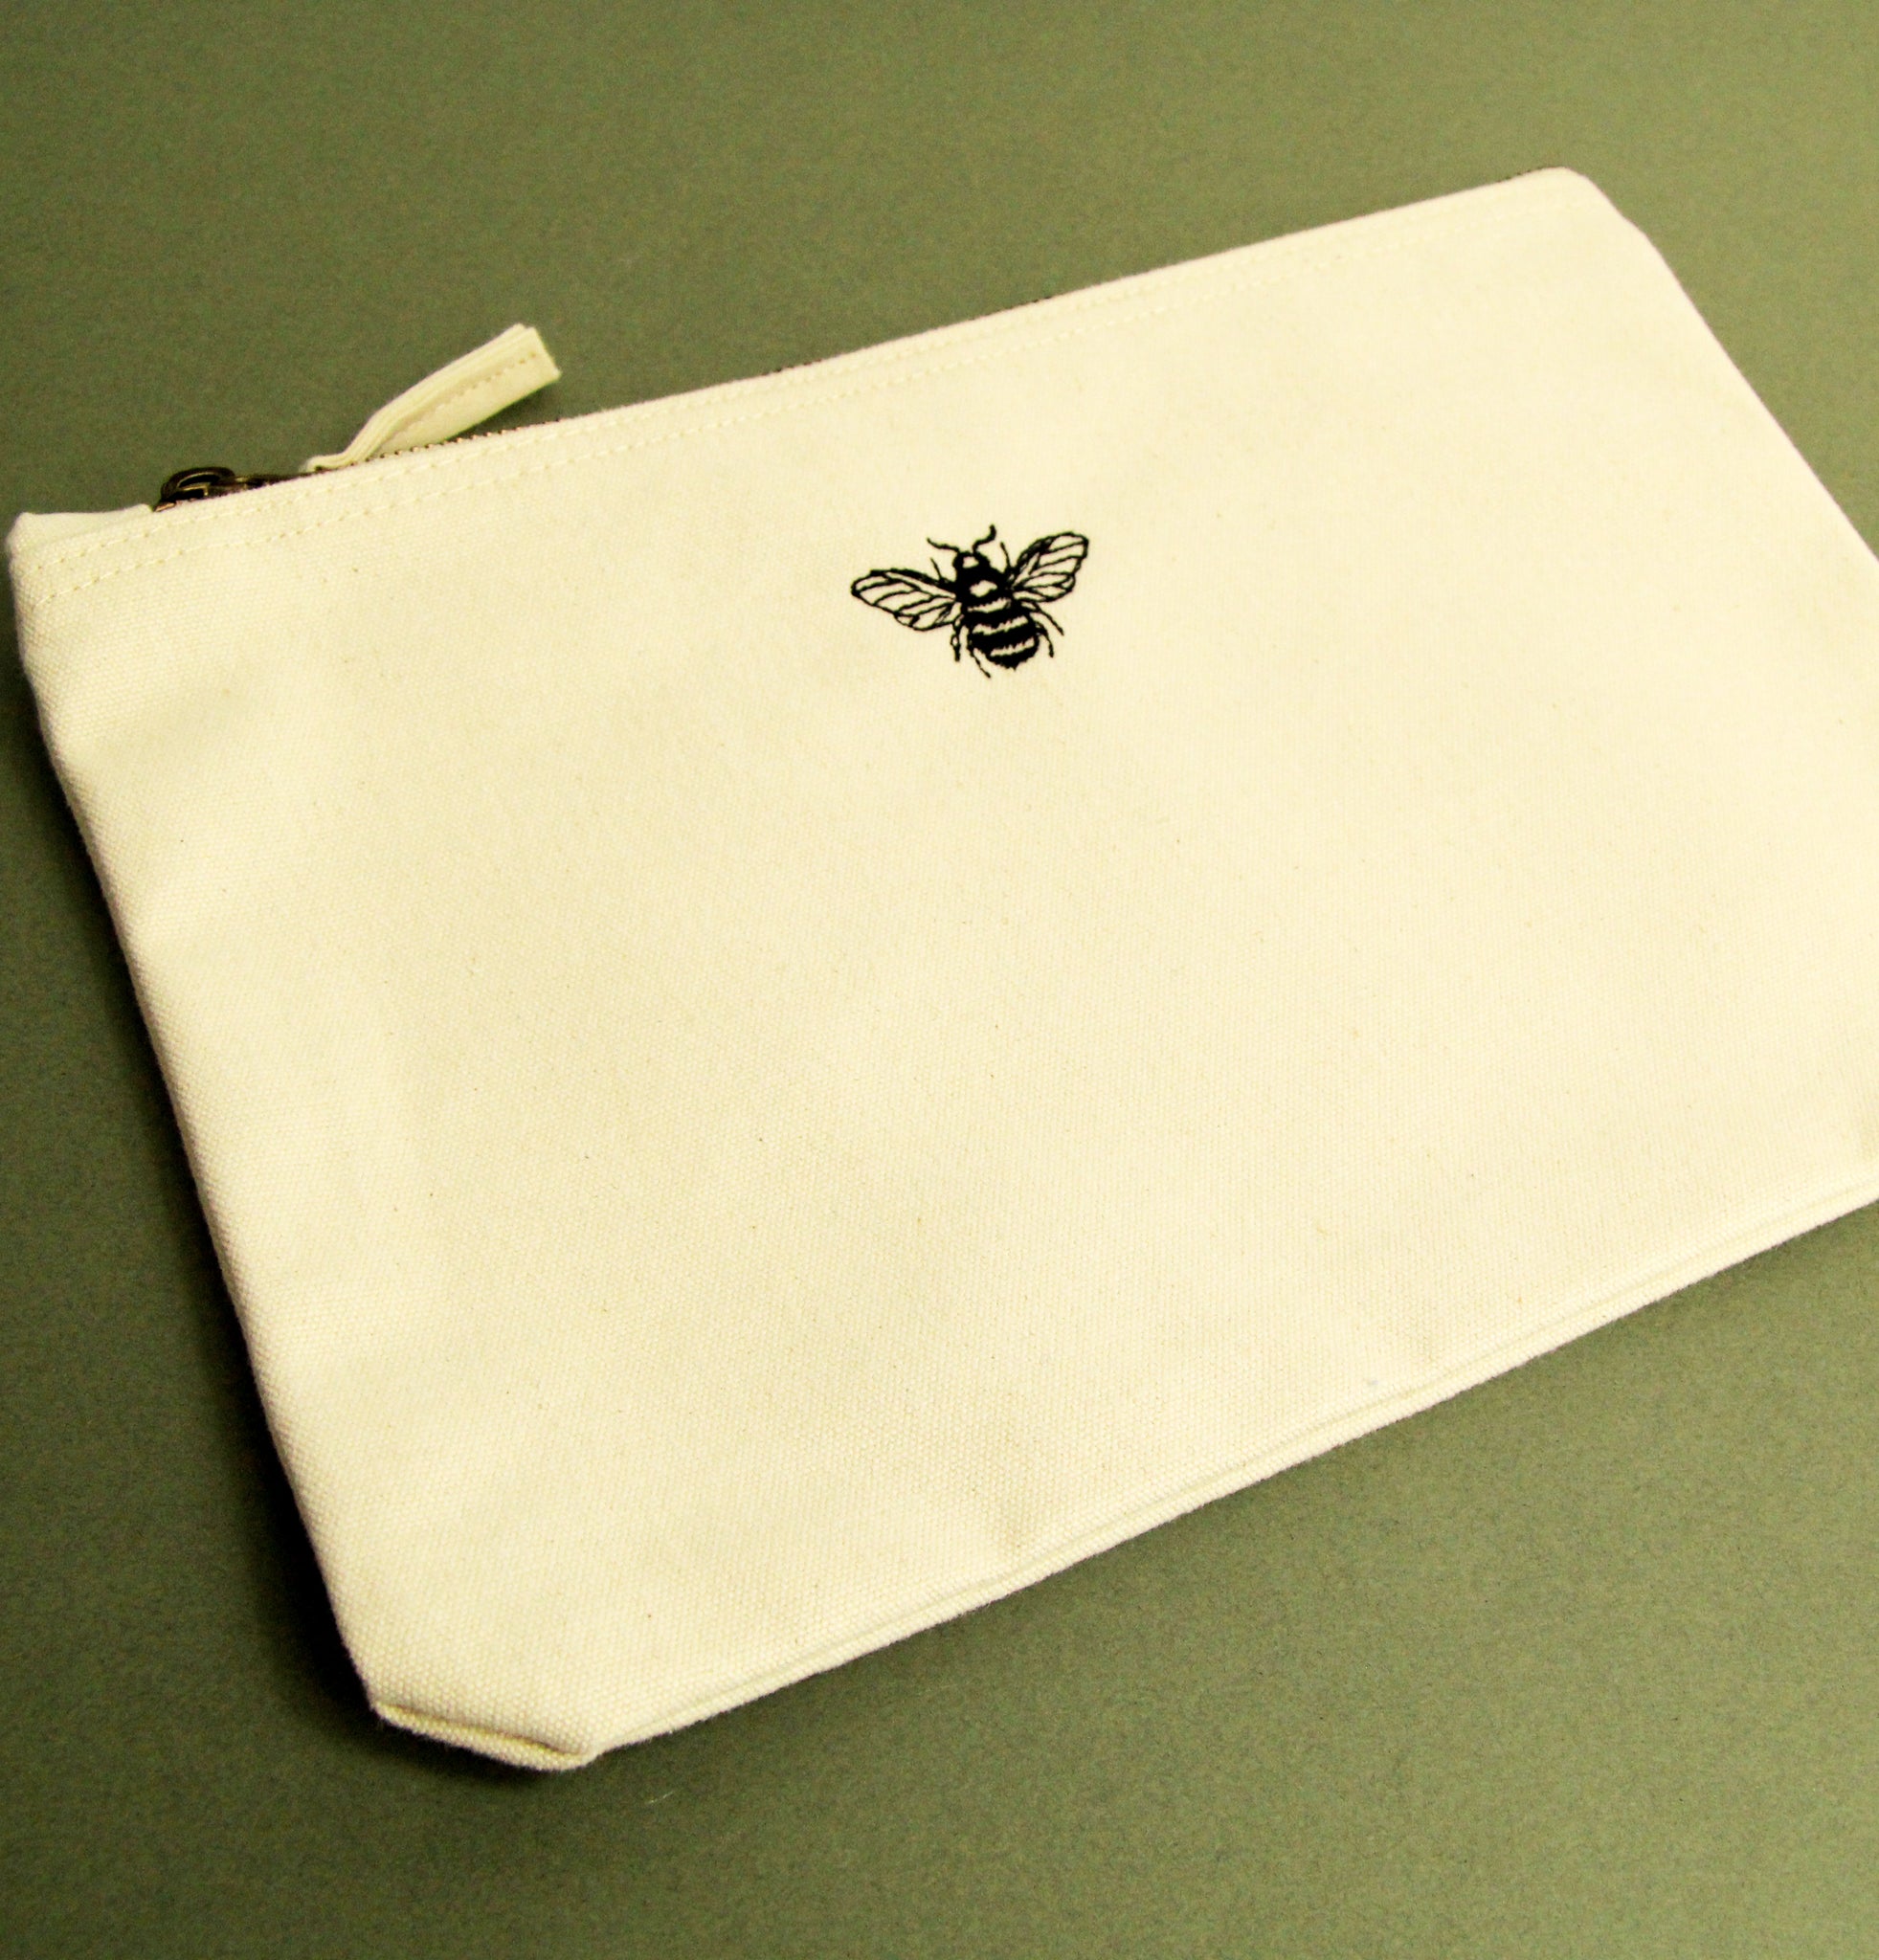 Embroidered Bee Zip Bag Large